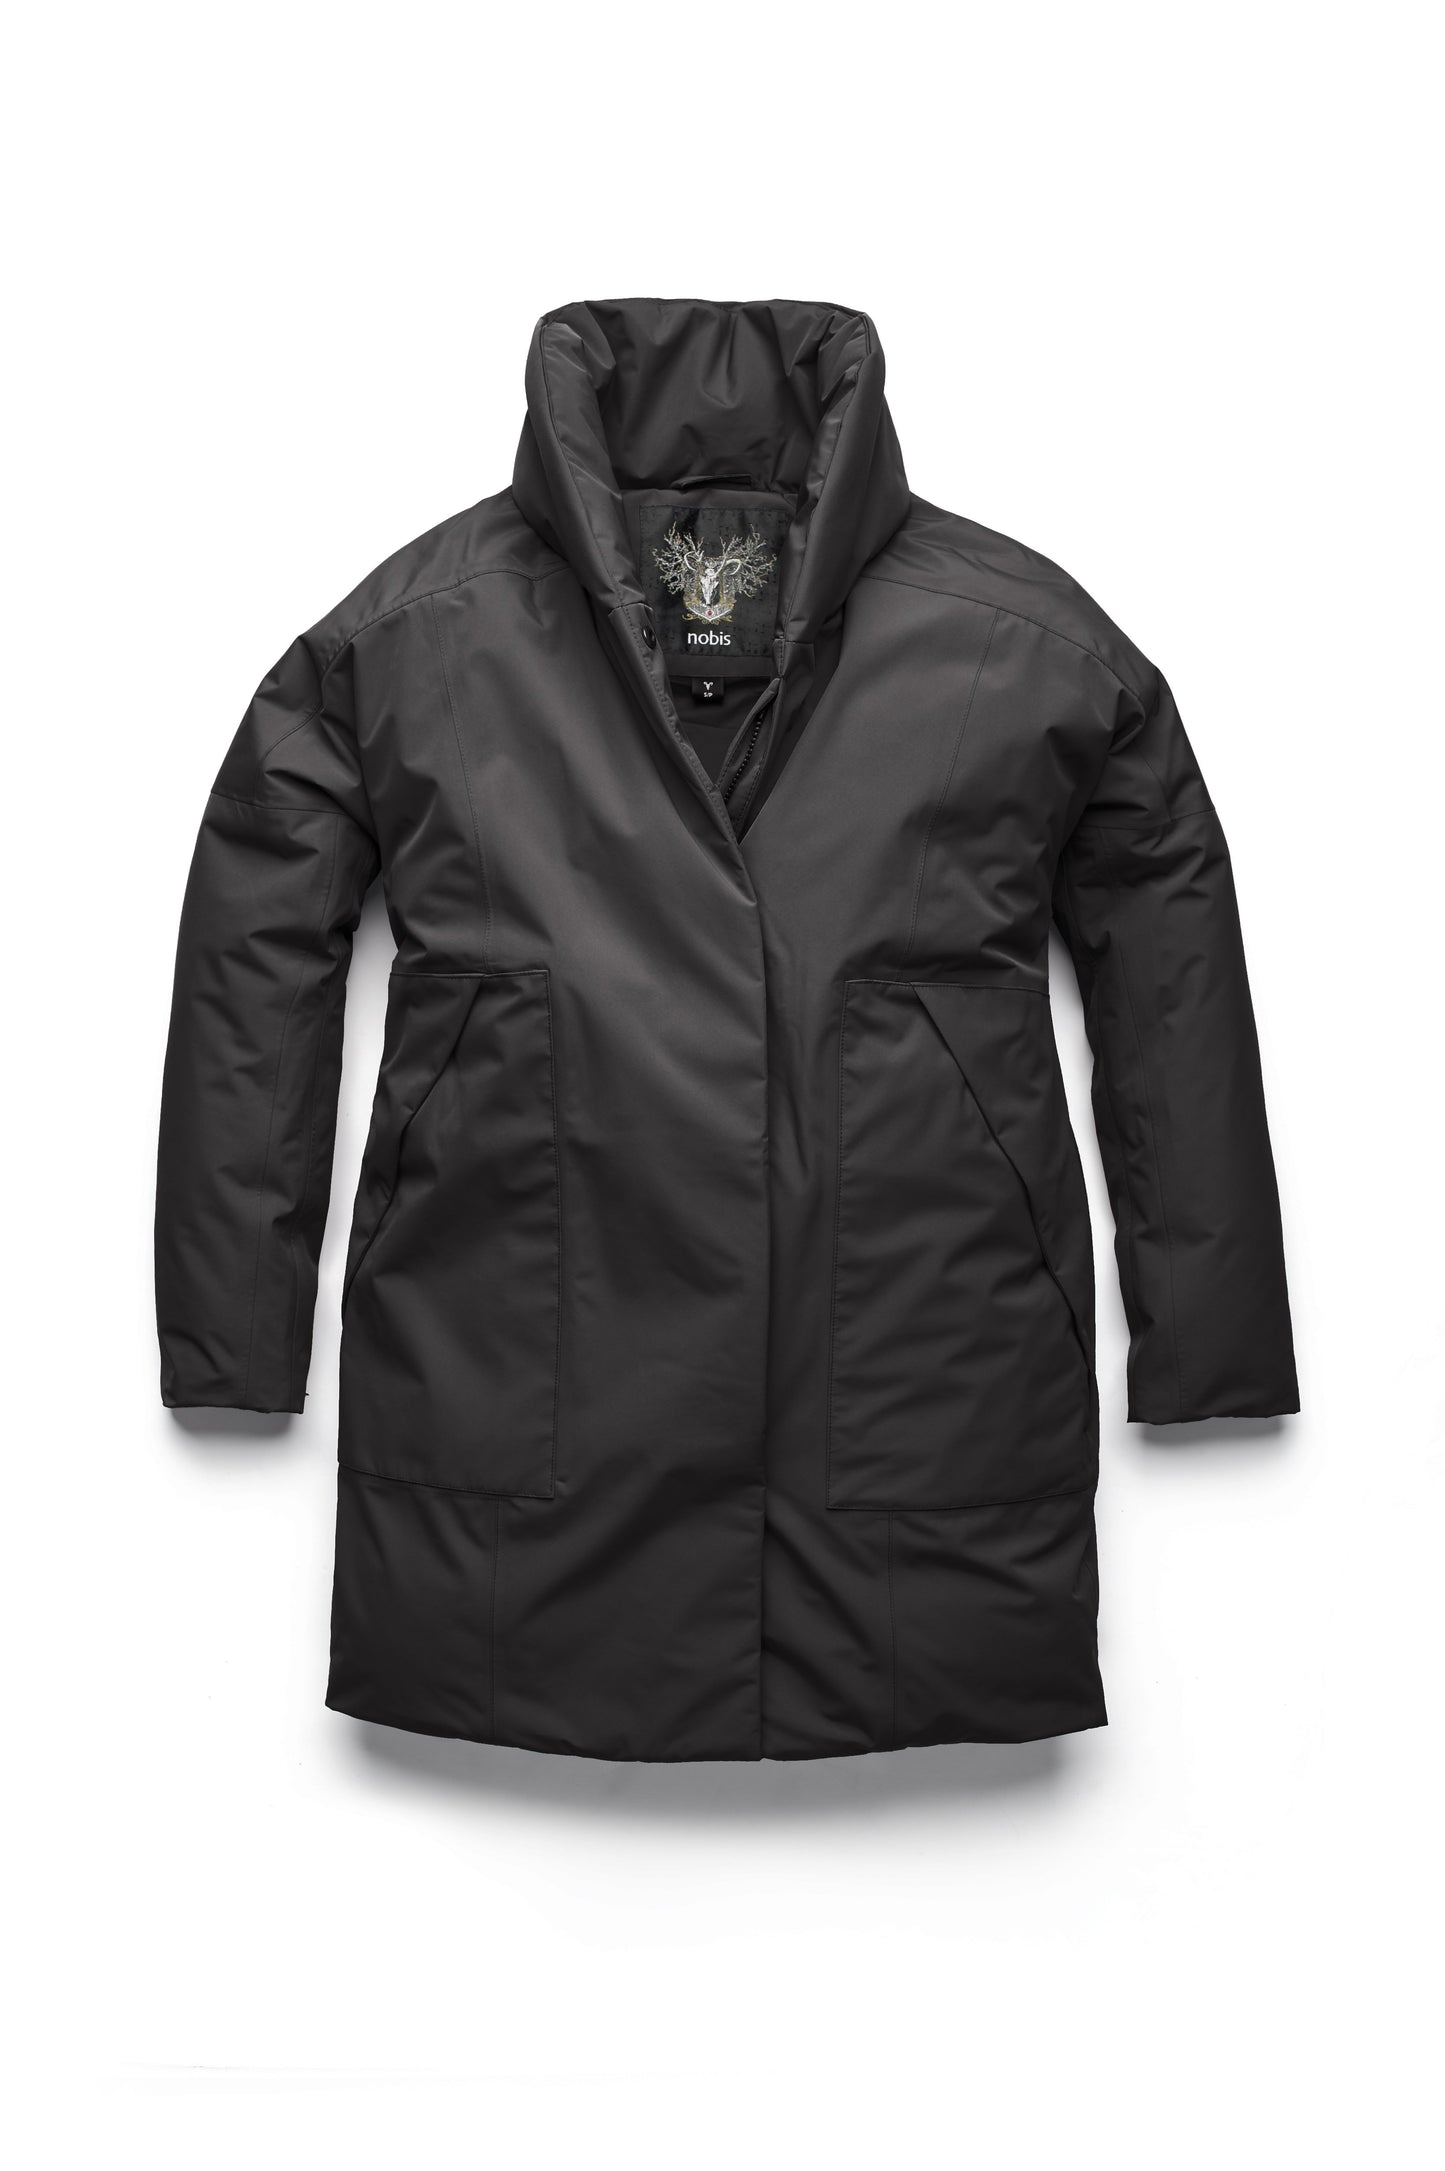 Women's down filled parka with cocoon silhouette and a beautiful shawl collar in Black